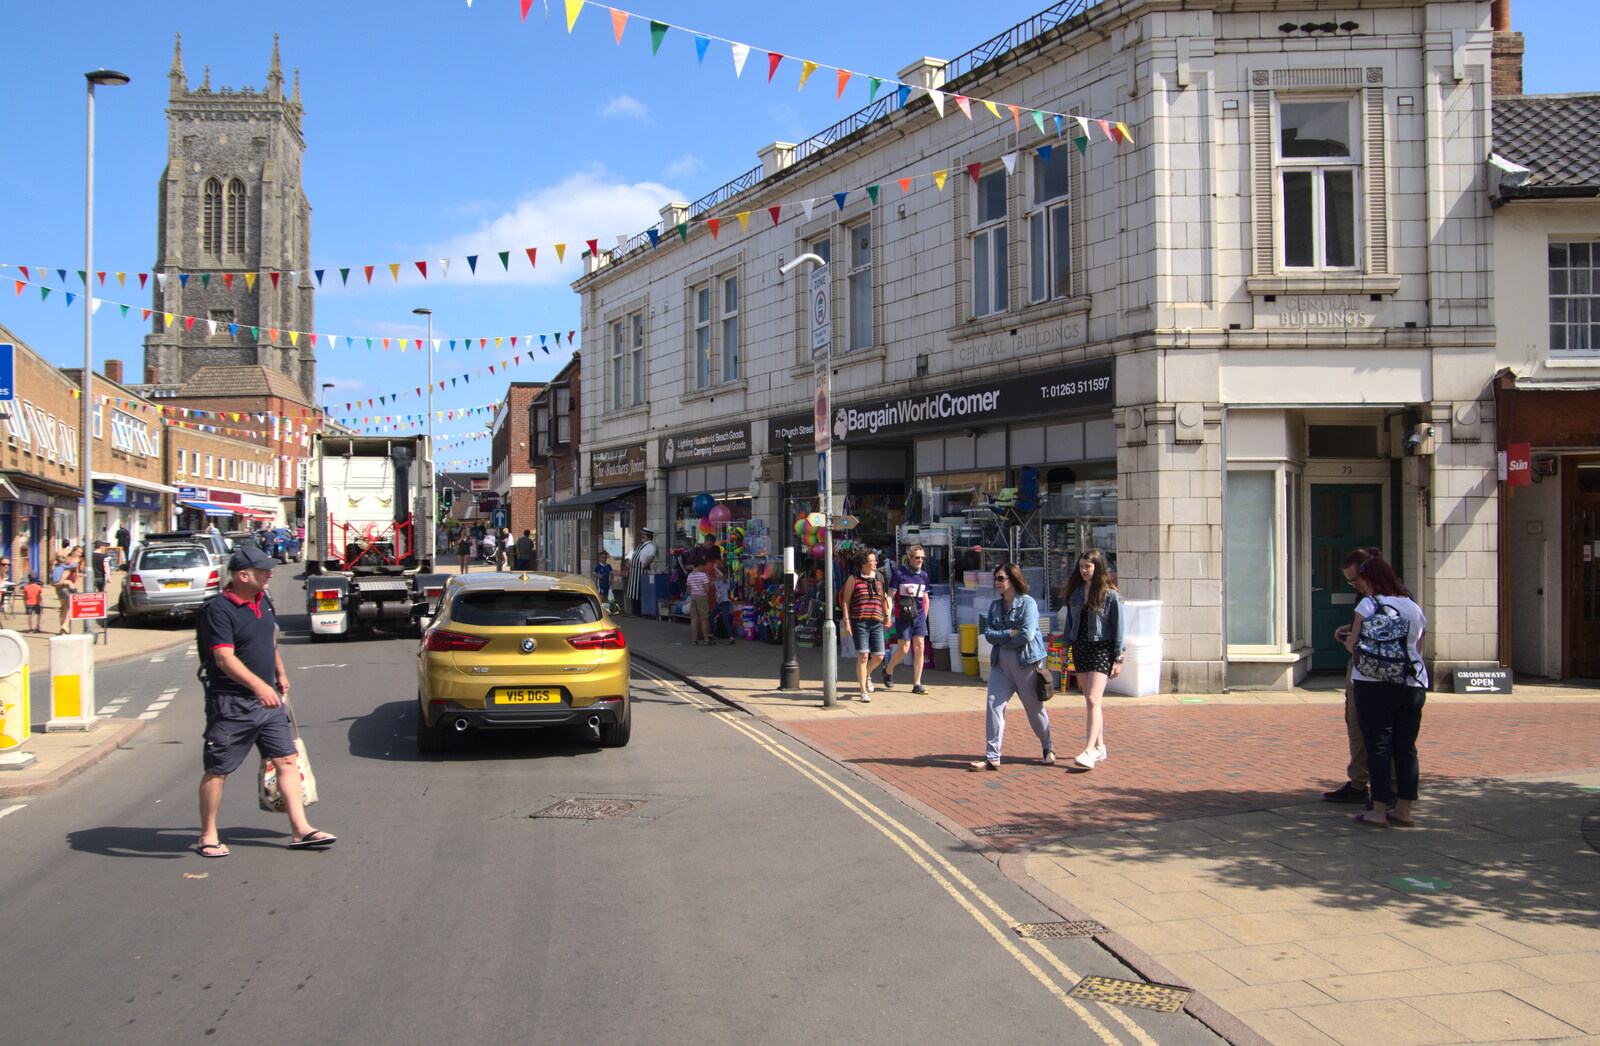 The General Building, and Cromer High Street from Camping on the Coast, East Runton, North Norfolk - 25th July 2020